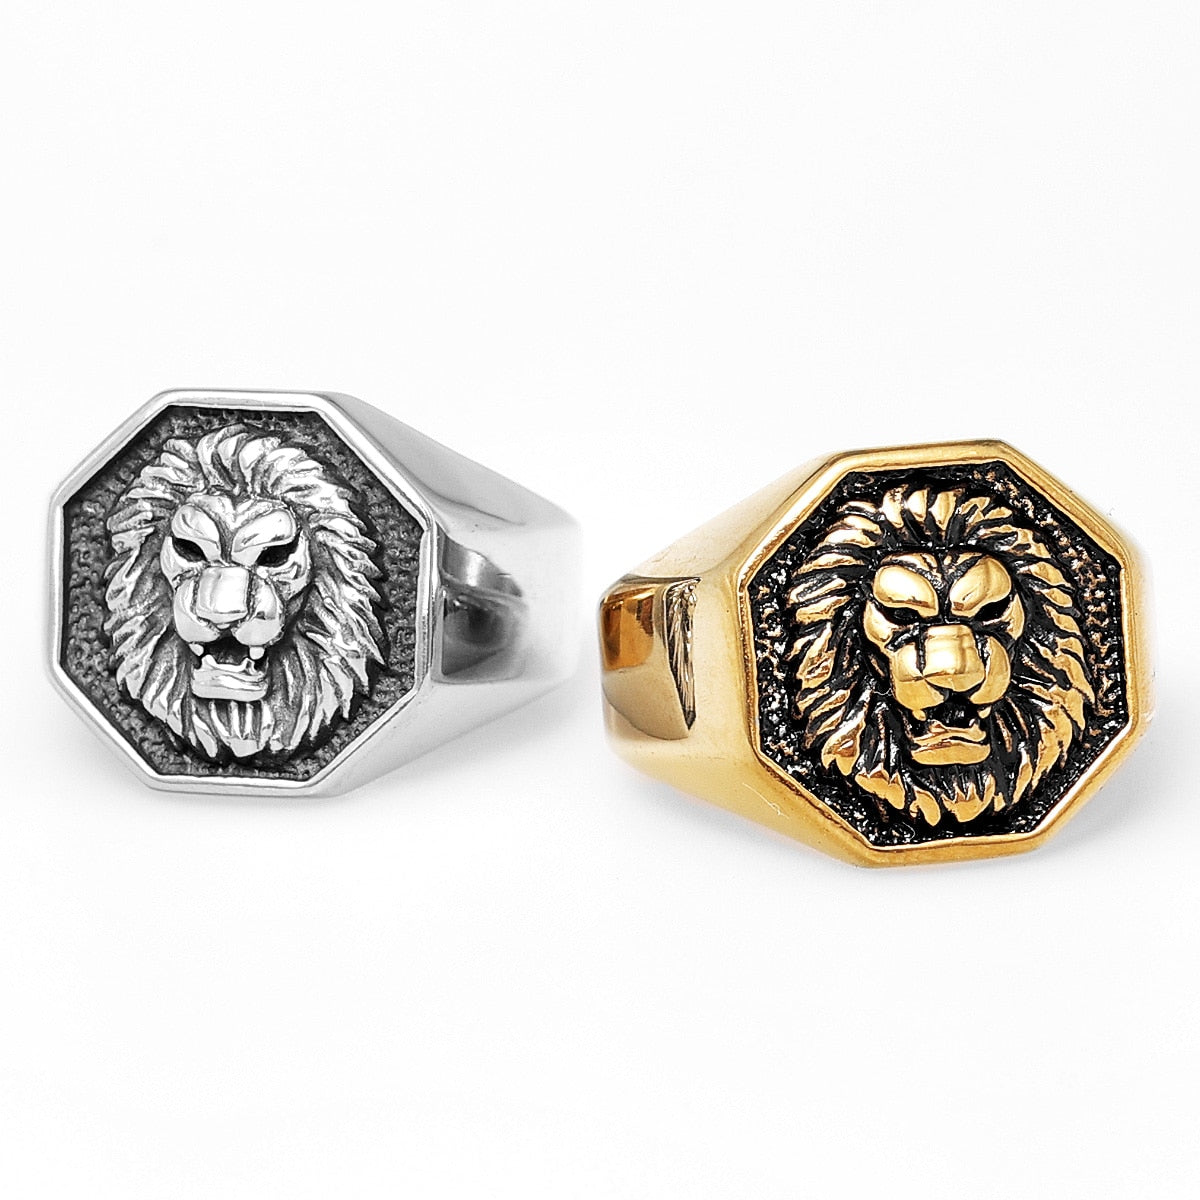 Lion King Animal Stainless Steel Mens Women's Rings Punk Trendy Unique for Couple Male Biker Jewelry Creativity Gift